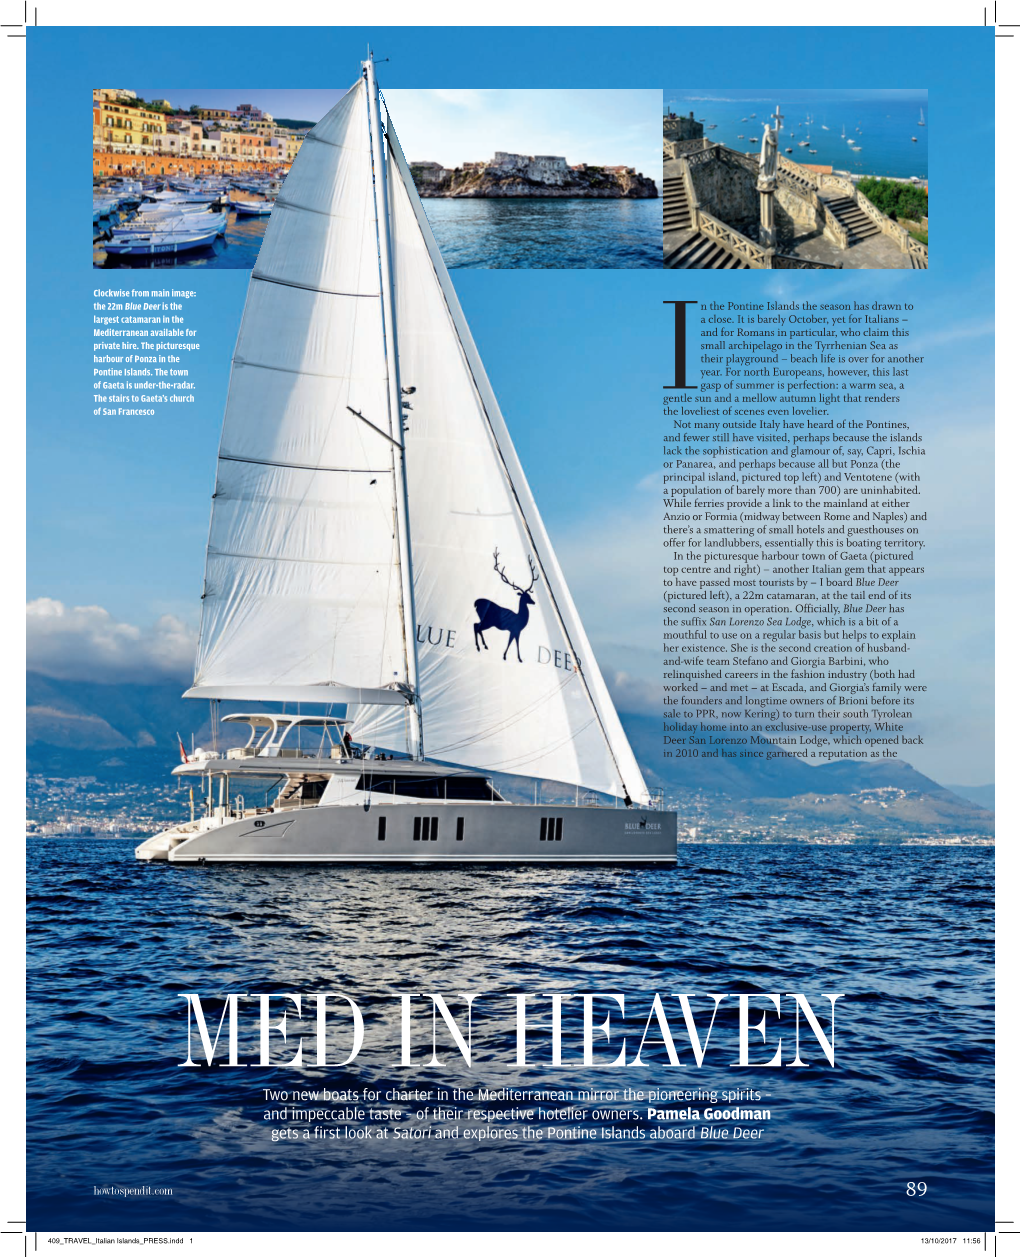 Two New Boats for Charter in the Mediterranean Mirror the Pioneering Spirits – and Impeccable Taste – of Their Respective Hotelier Owners